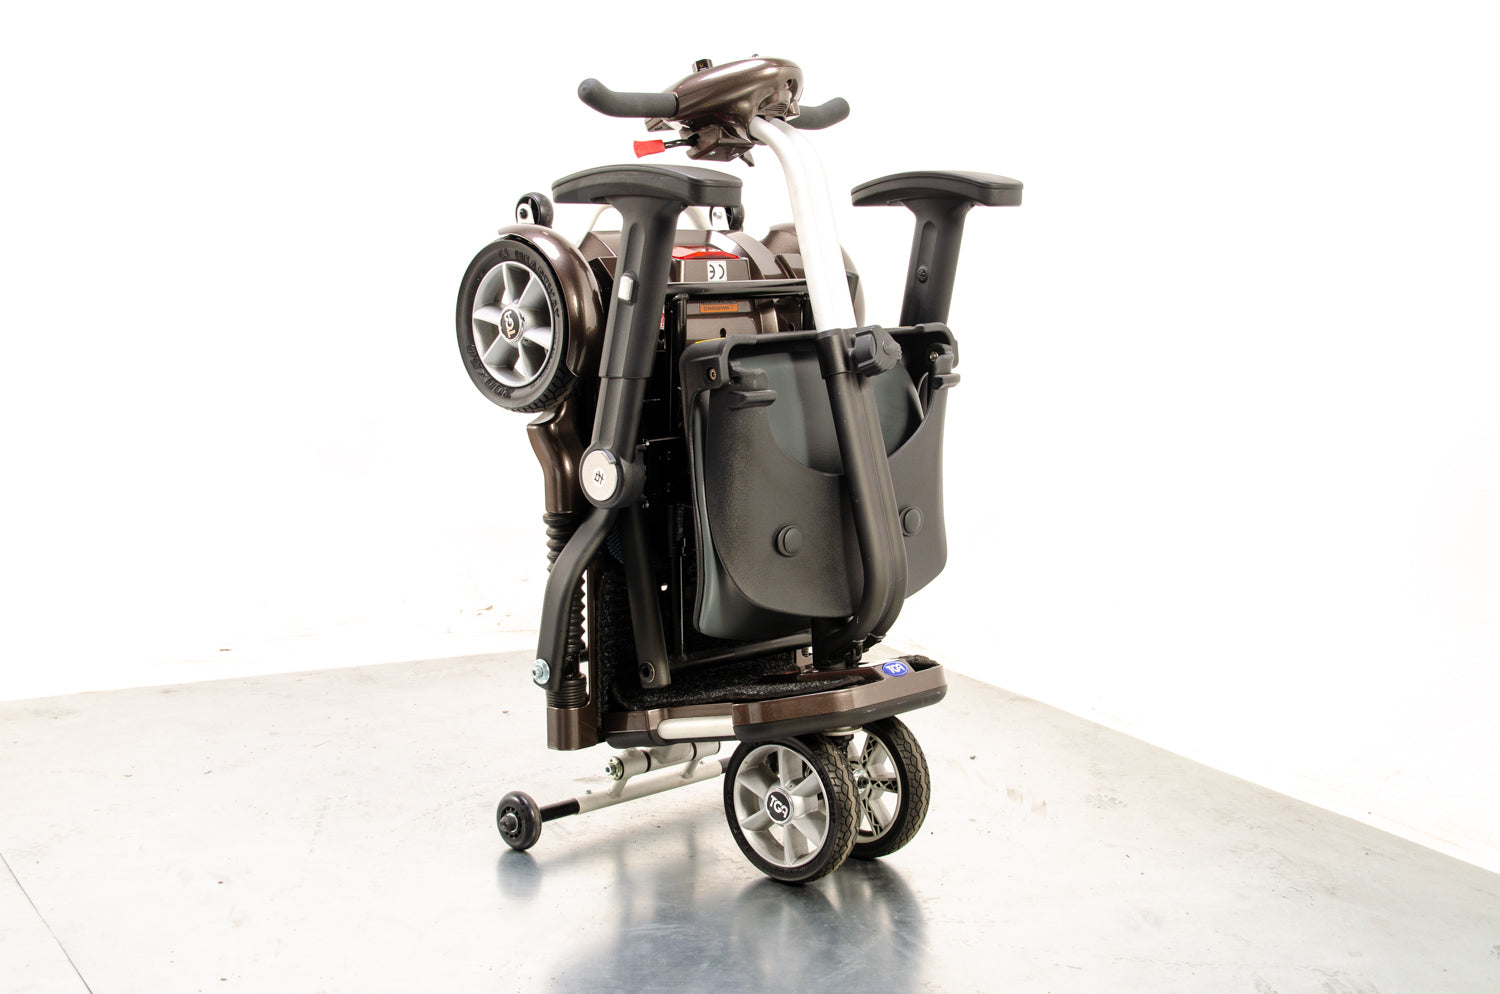 TGA Minimo Used Mobility Scooter Small Compact Folding Travel Lithium Battery Lightweight 13461